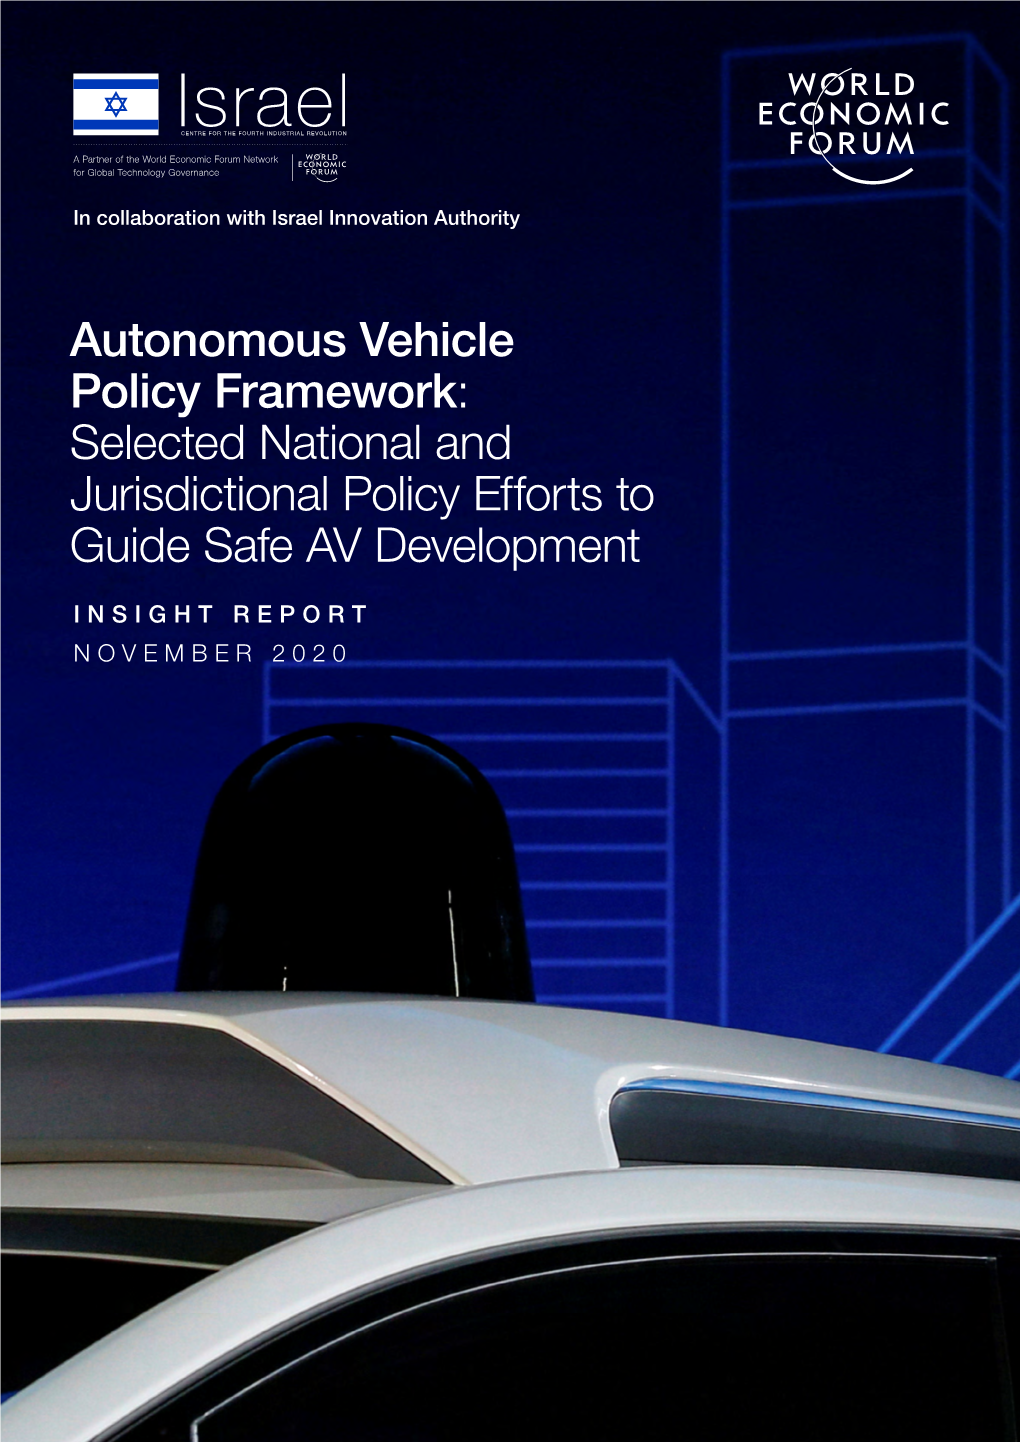 Autonomous Vehicle Policy Framework: Selected National and Jurisdictional Policy Efforts to Guide Safe AV Development